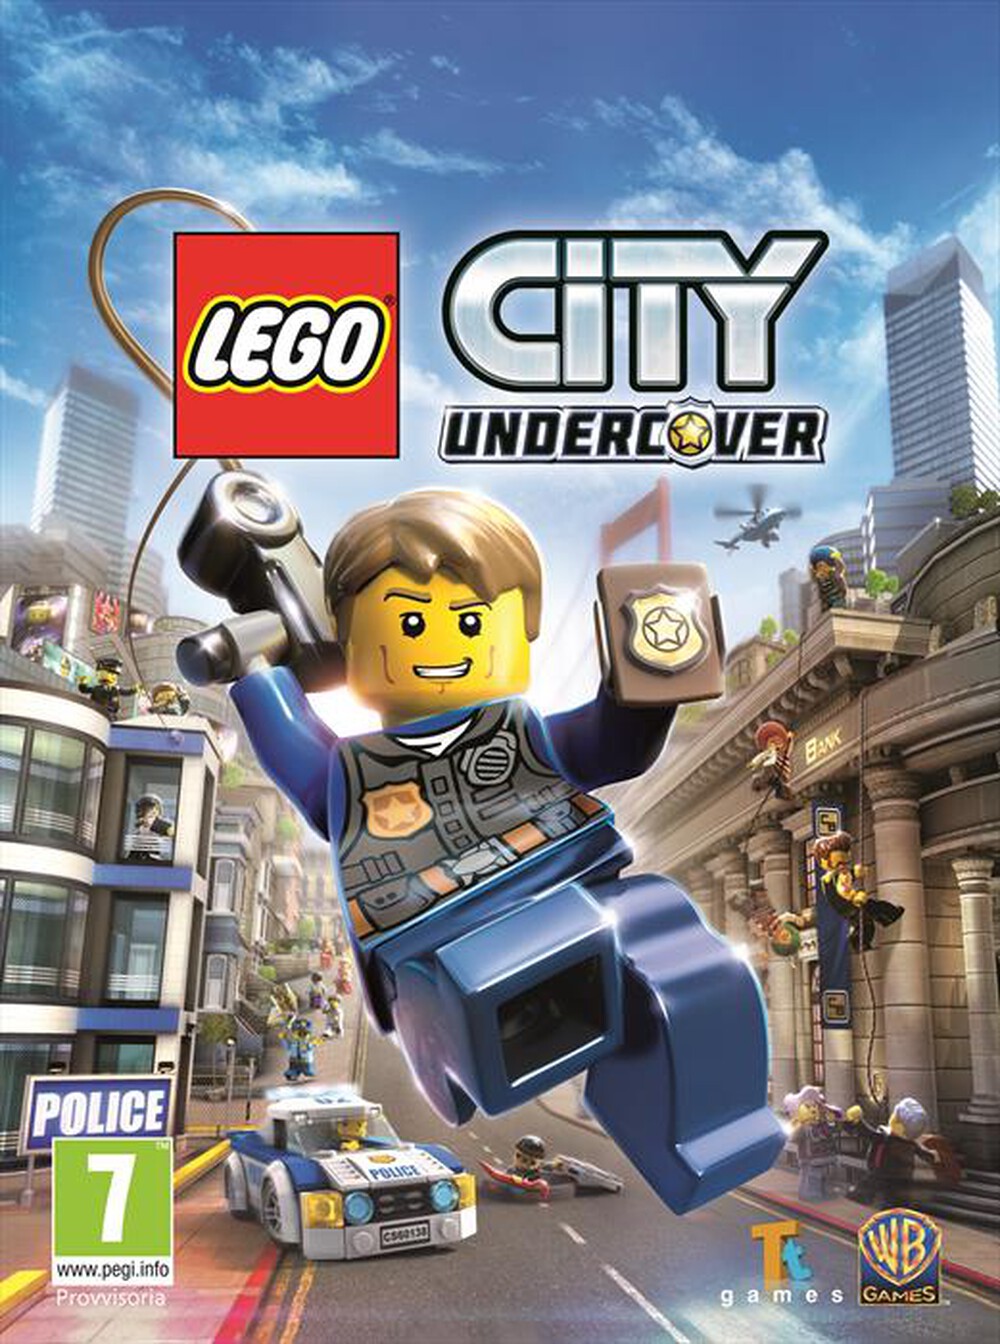 "WARNER GAMES - LEGO City Undercover SWITCH"